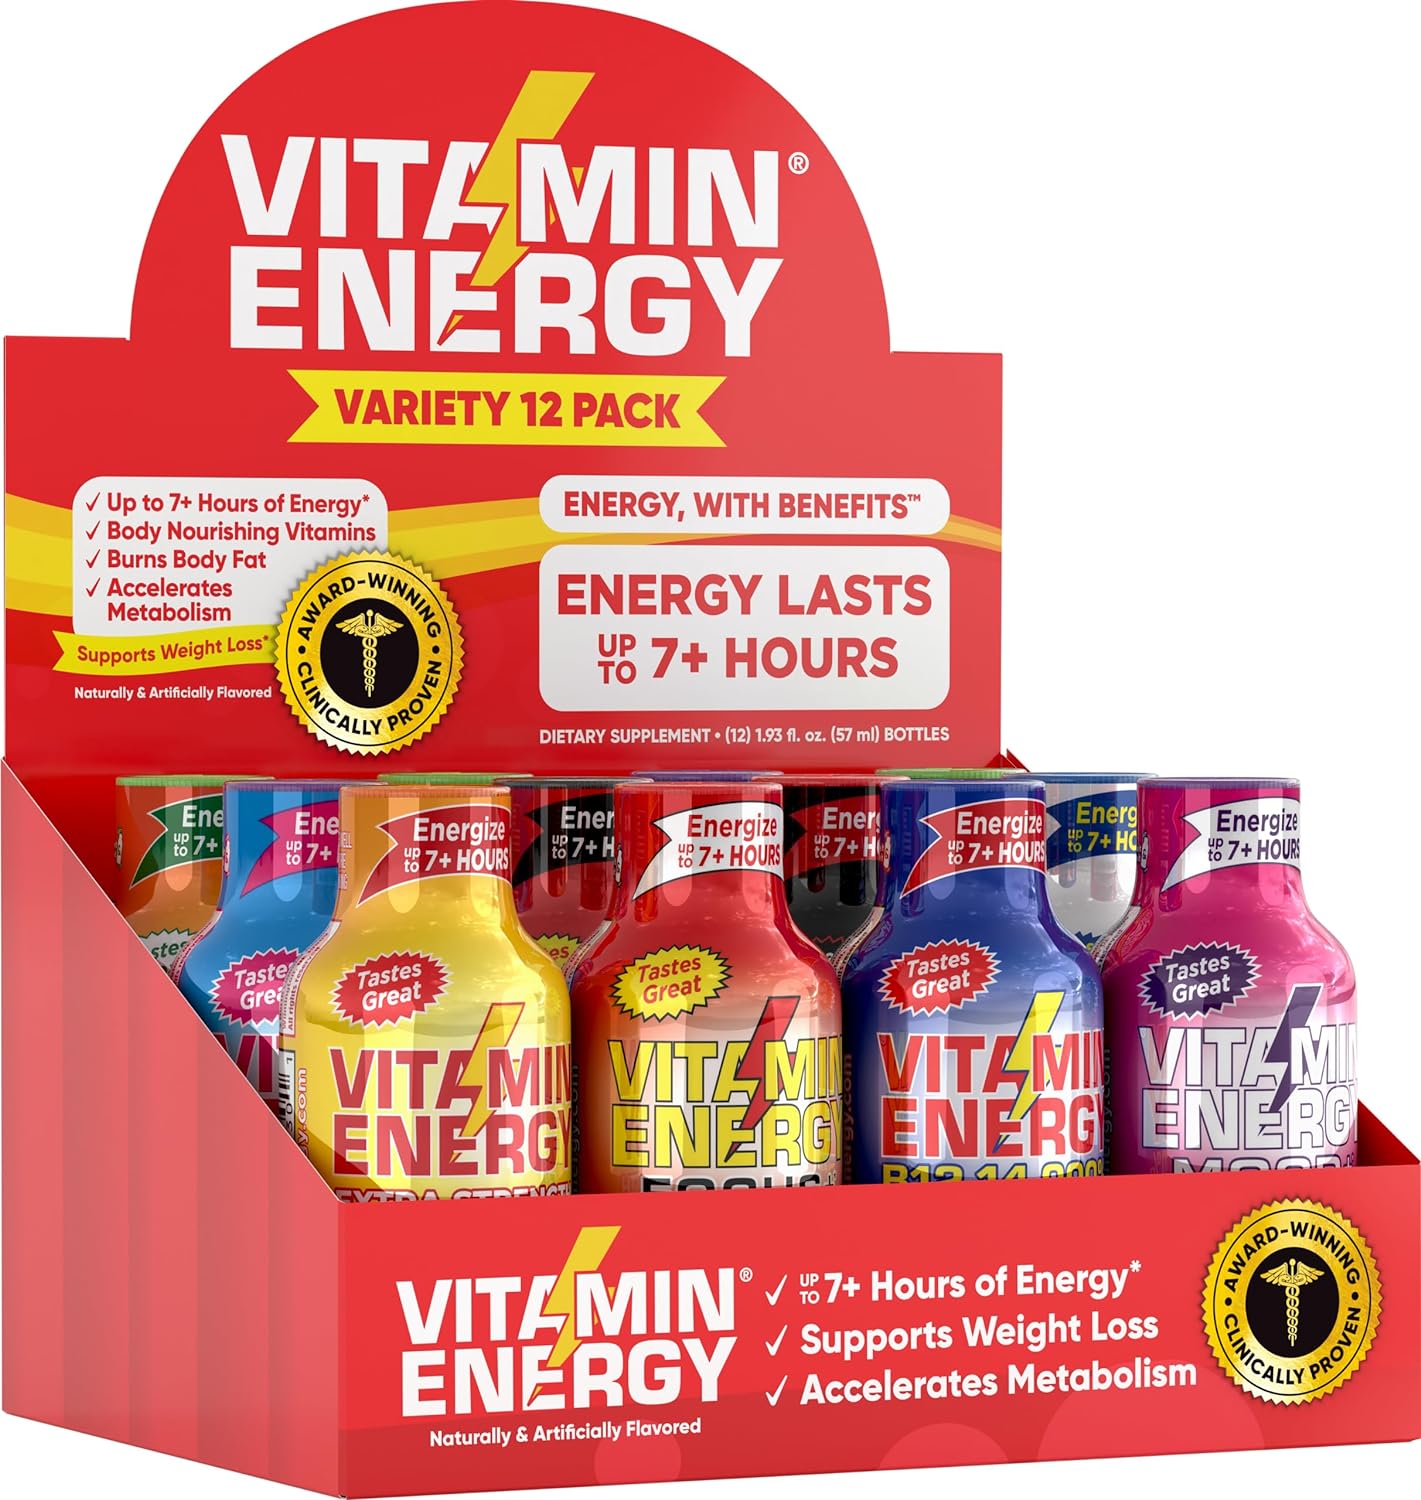 Vitamin Energy Variety | Wellness Shots | Natural Healthy Energy, Focus, Immune, & Sleep Drinks | Sugar & Carb-Free Supplement | Vitamins & Nutrients Energize up to 7+ Hours | 1.93 fl oz (Pack of 12)